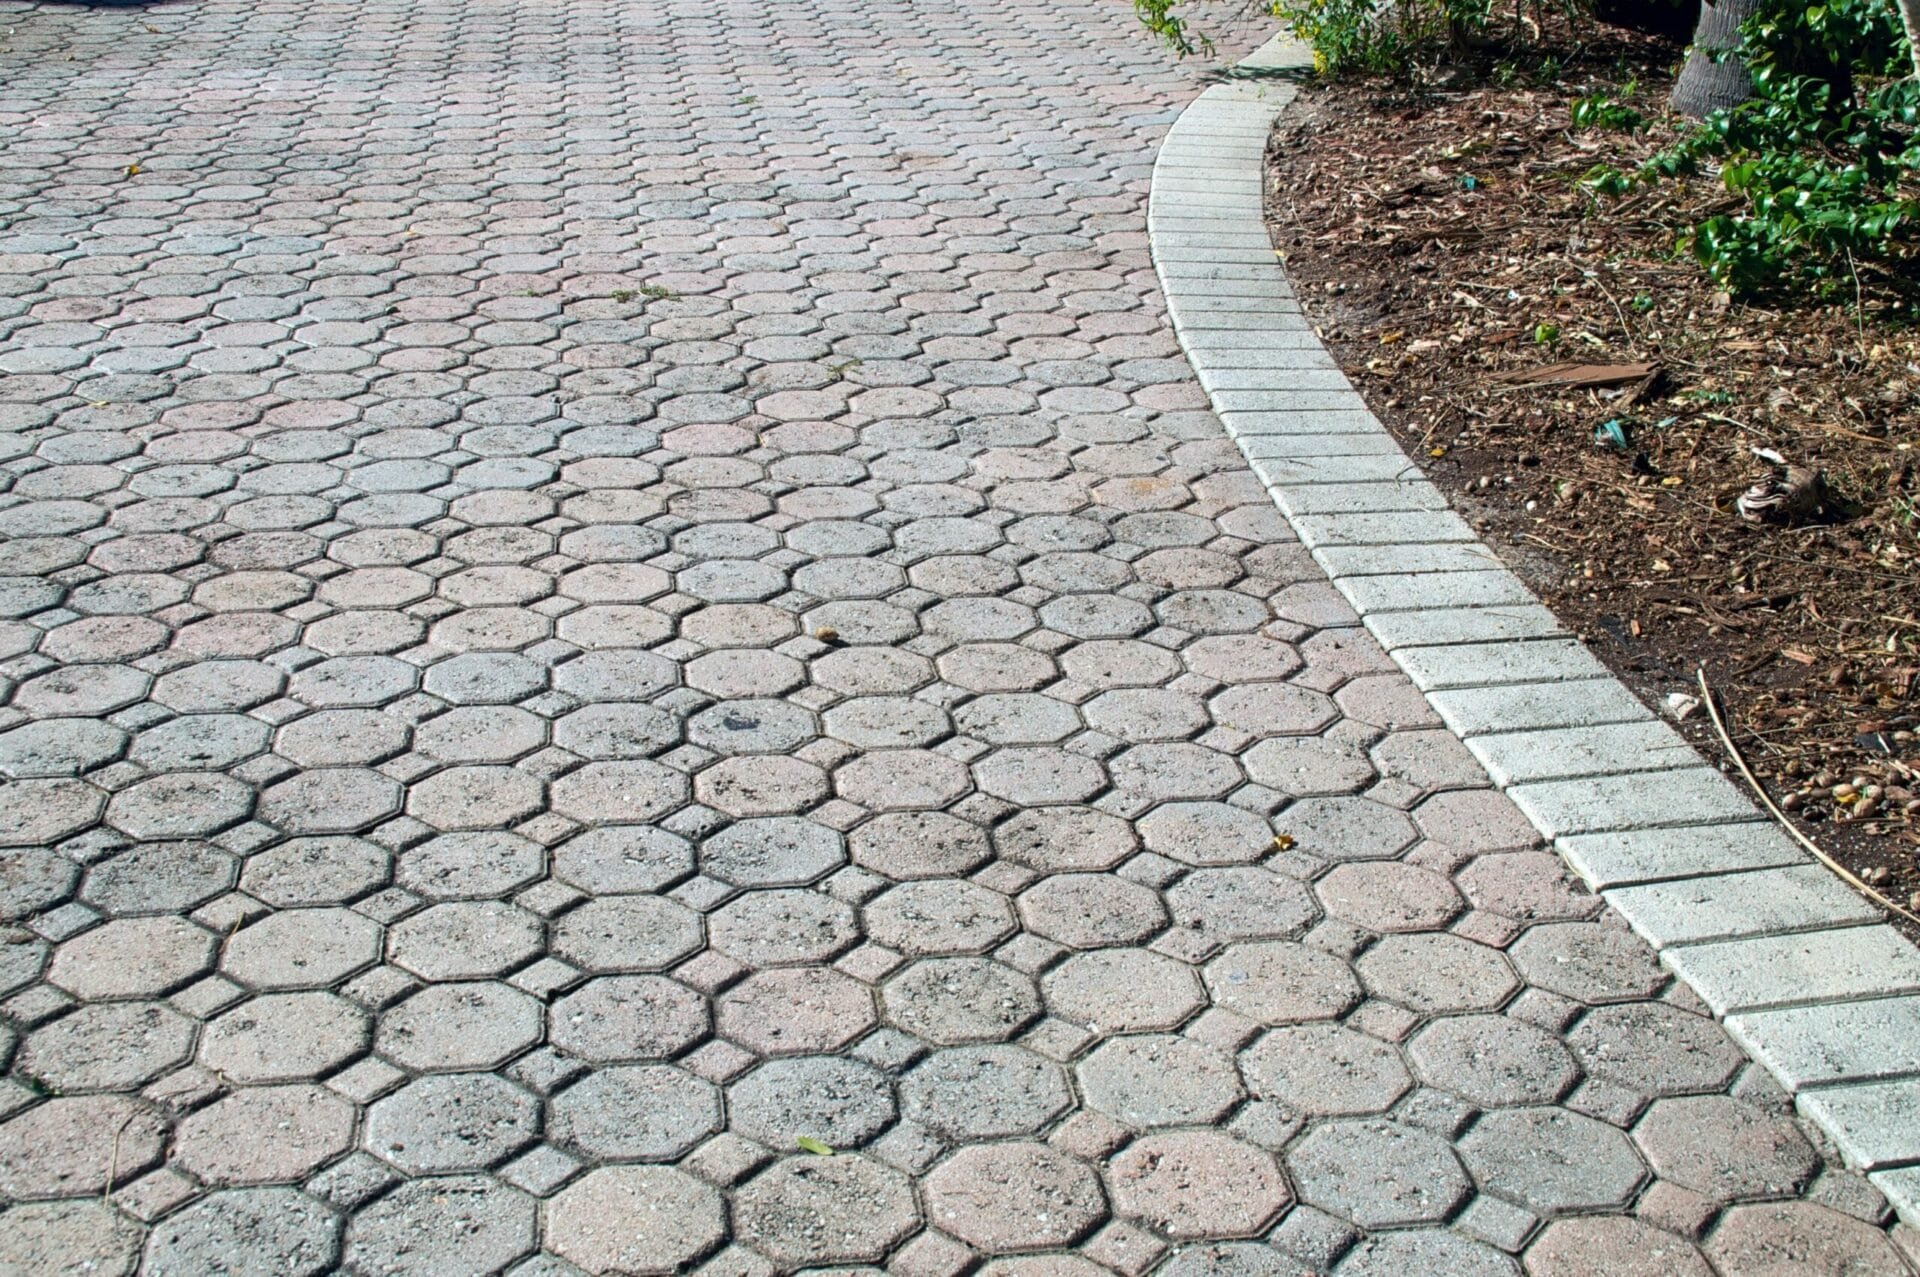 A curved brick pathway with hexagonal pavers in the Bay Area, bordered by a white concrete edge and vegetation on one side.